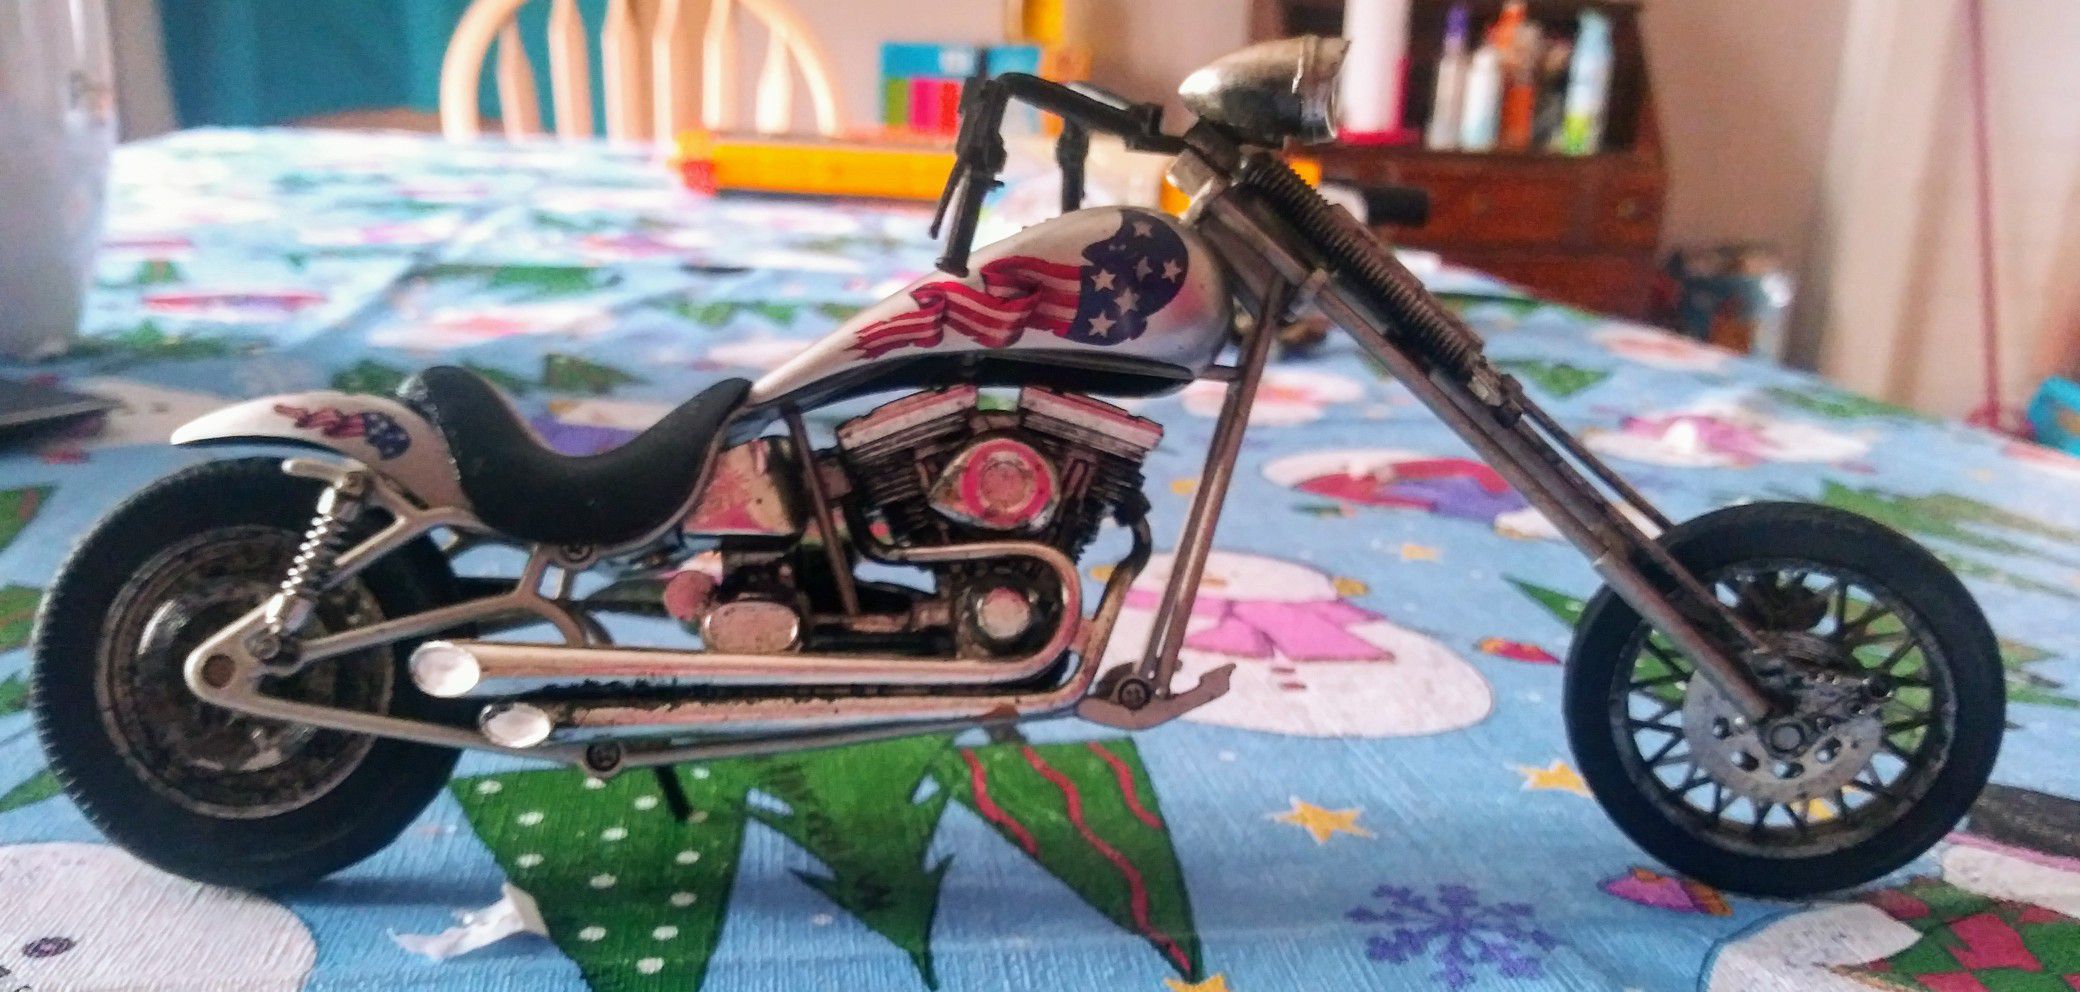 Toy collectable motorcycle item